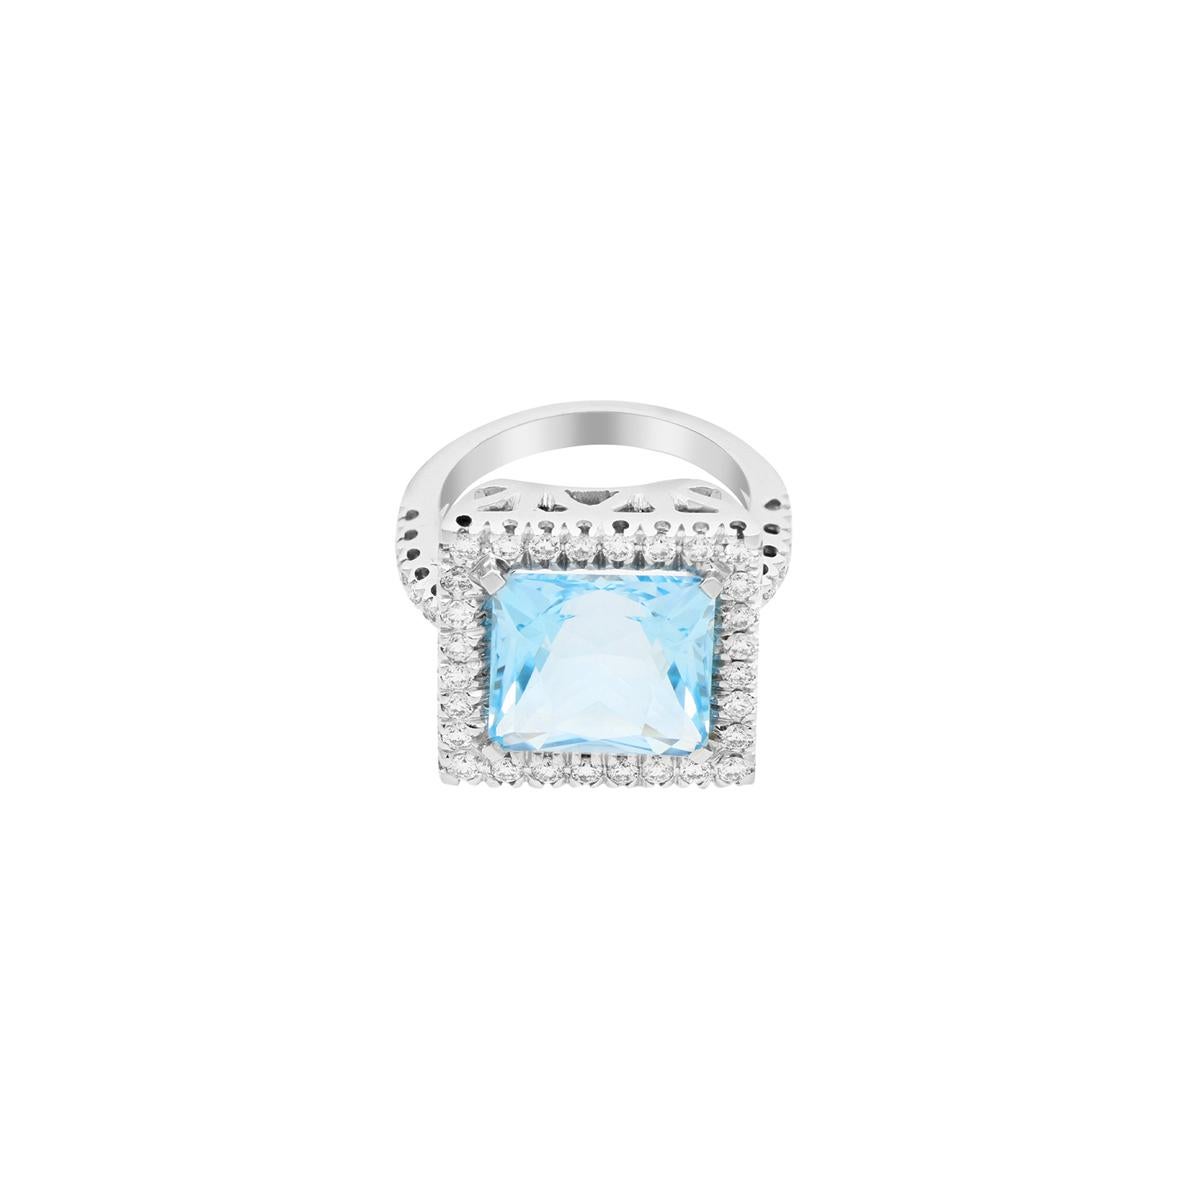 This fairy-tale-inspired ring features a princess-cut topaz with a diamond halo. It is centered on an 18 Kt white gold, diamond-pavé shank. Topaz is the birthstone of December and the stone is usually the go-to gift for the 4th and 19th